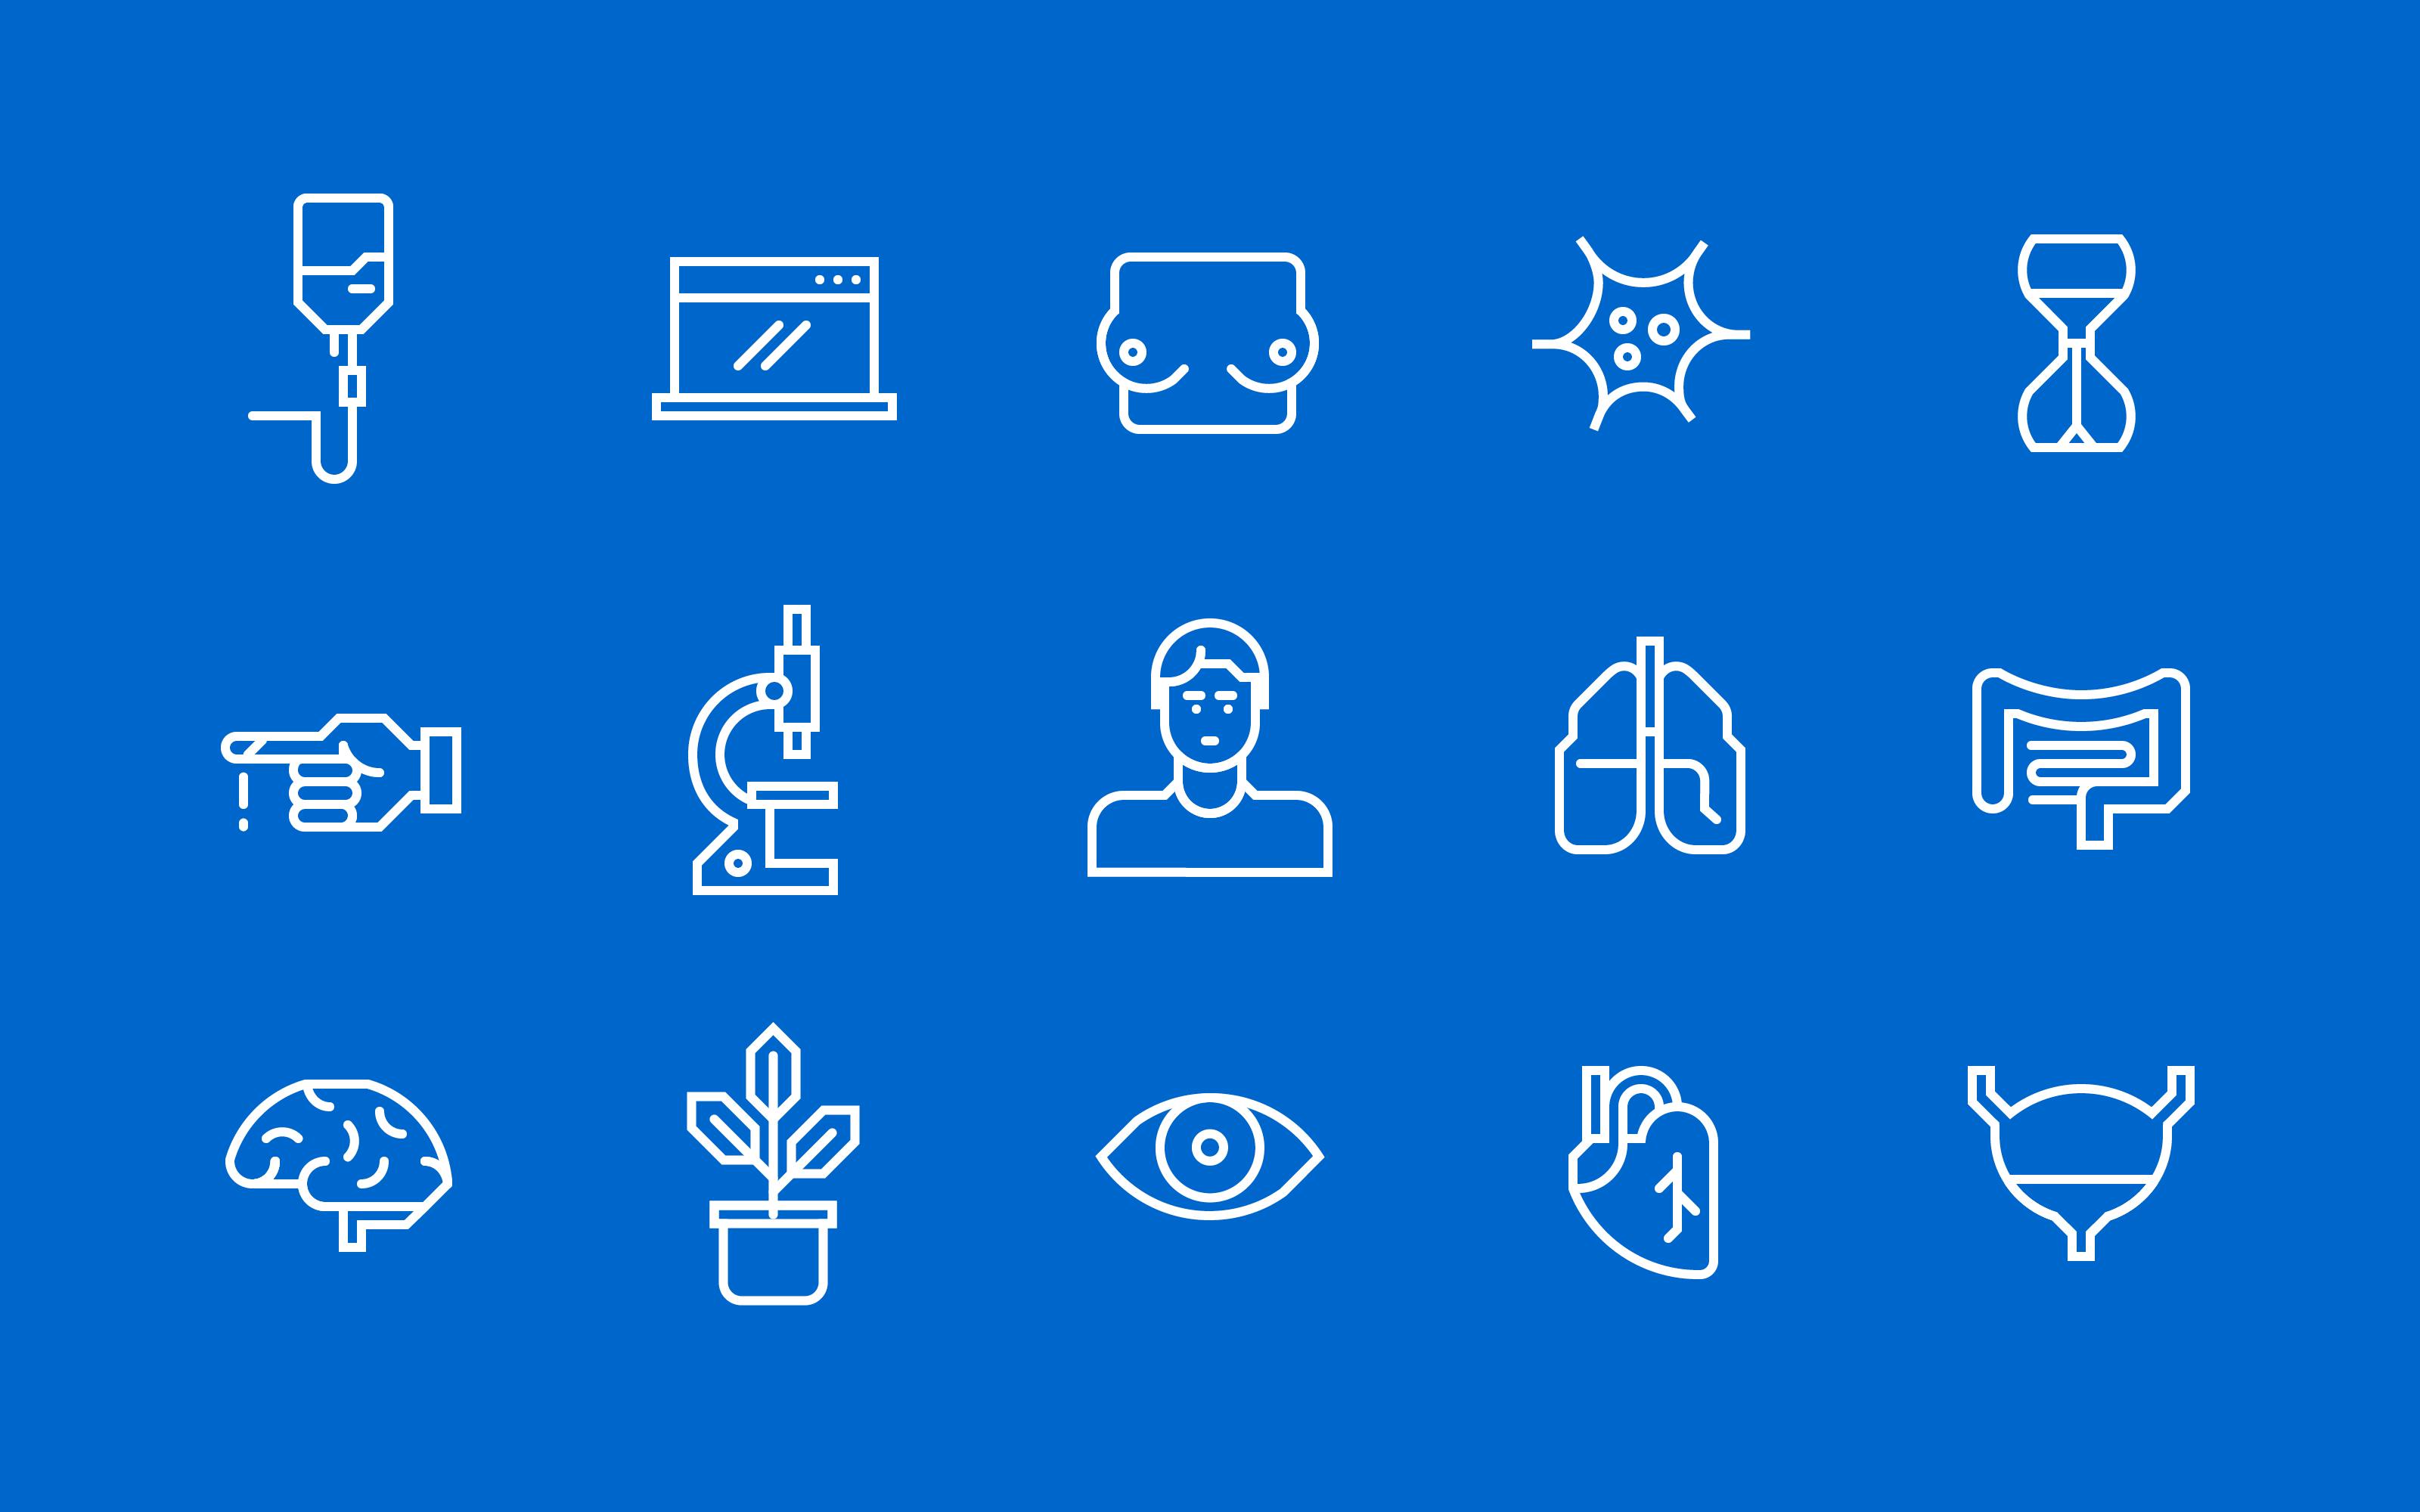 Superdot Studio Robust modular icon system for global brand communication for Roche